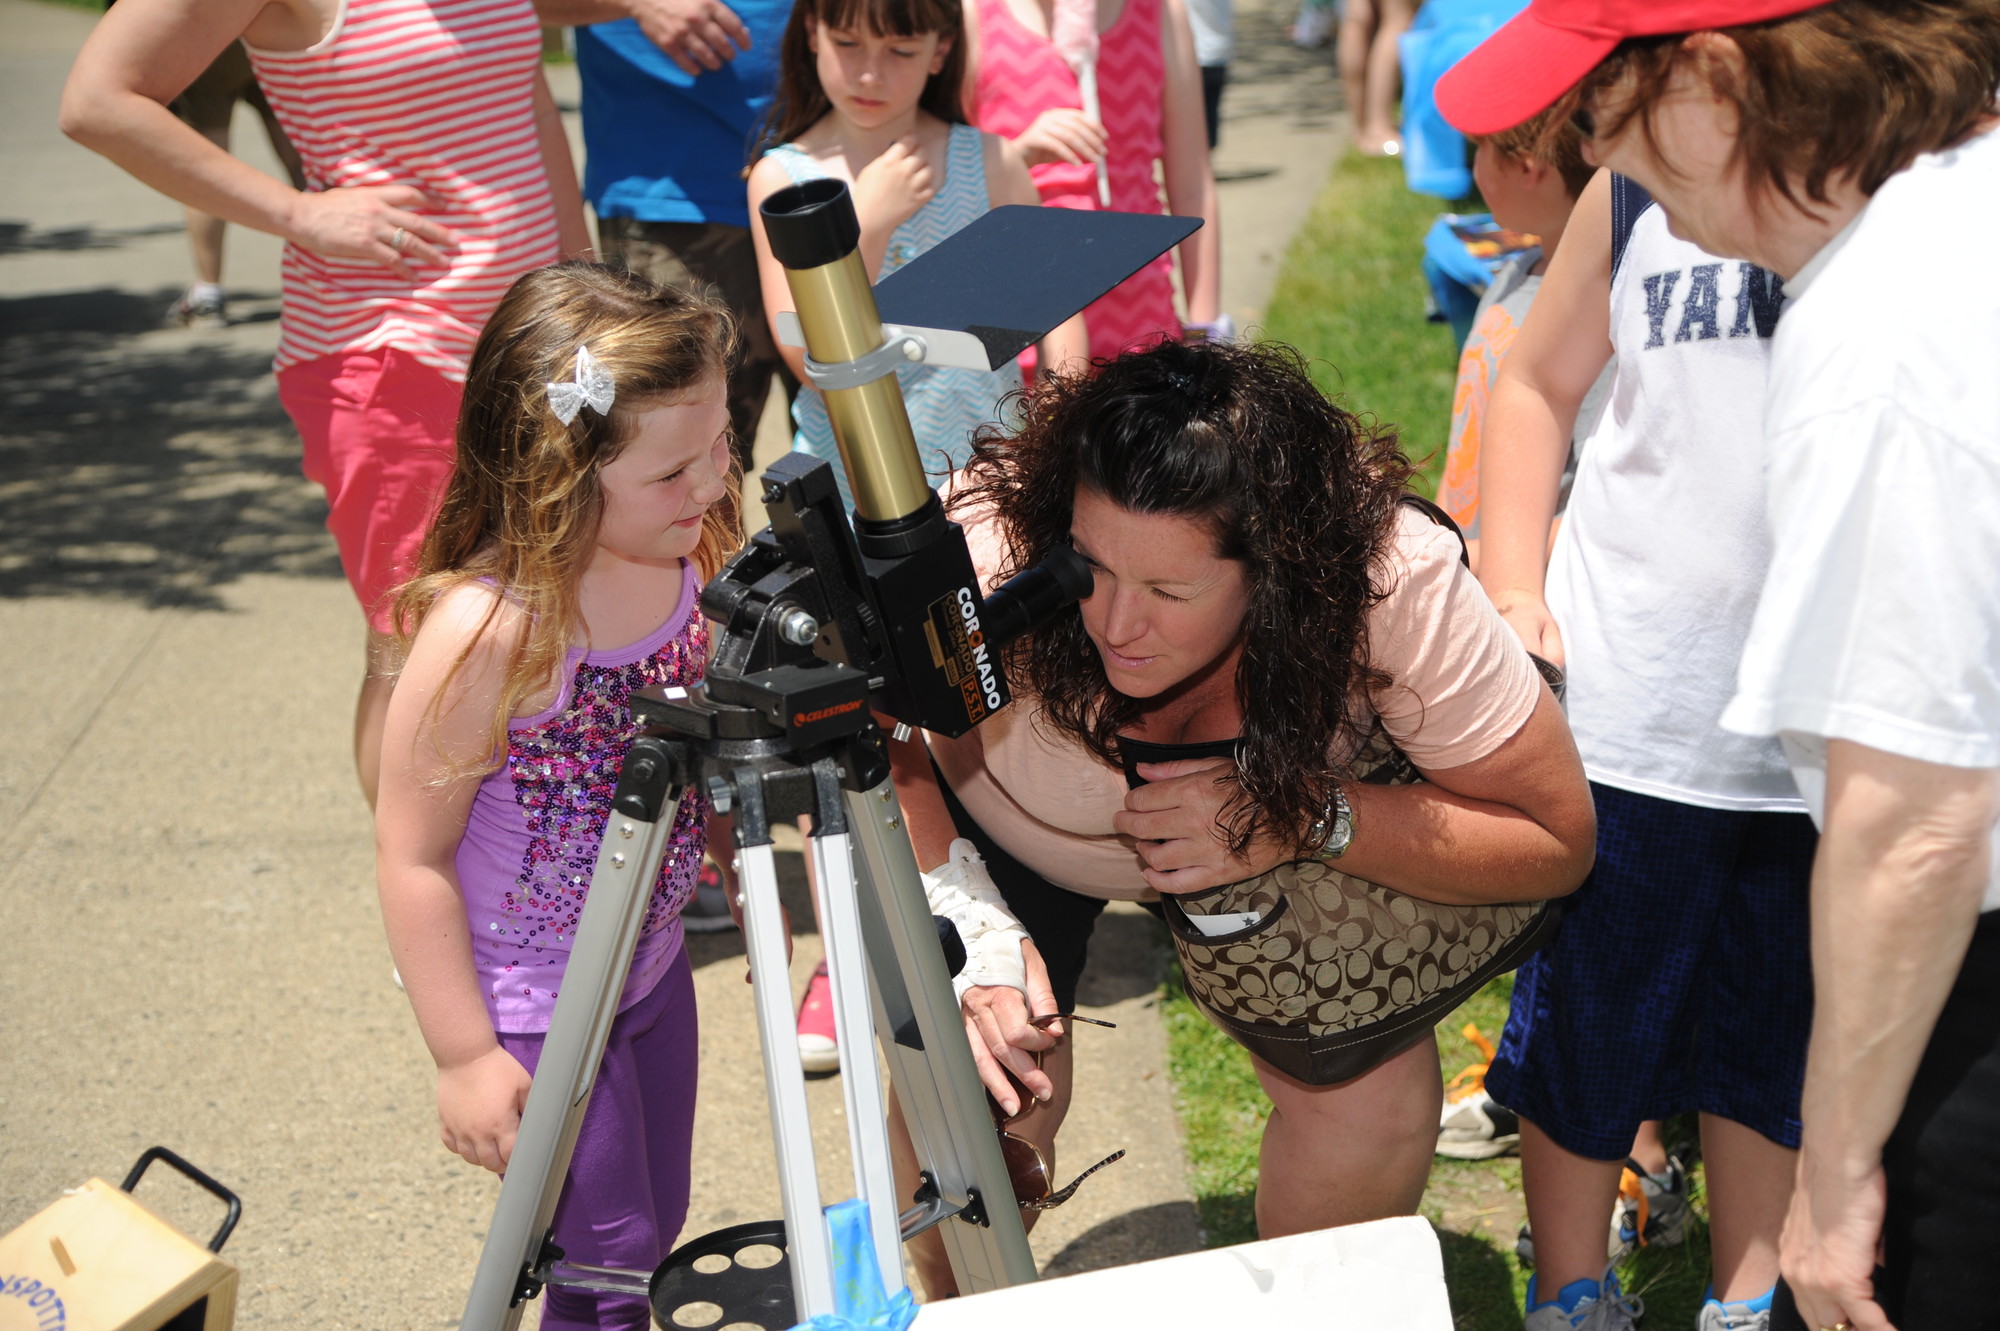 Ashley O’ Connor, 4, waited her turn as her mother, Lisa, used a telescope to peer into the sky above.